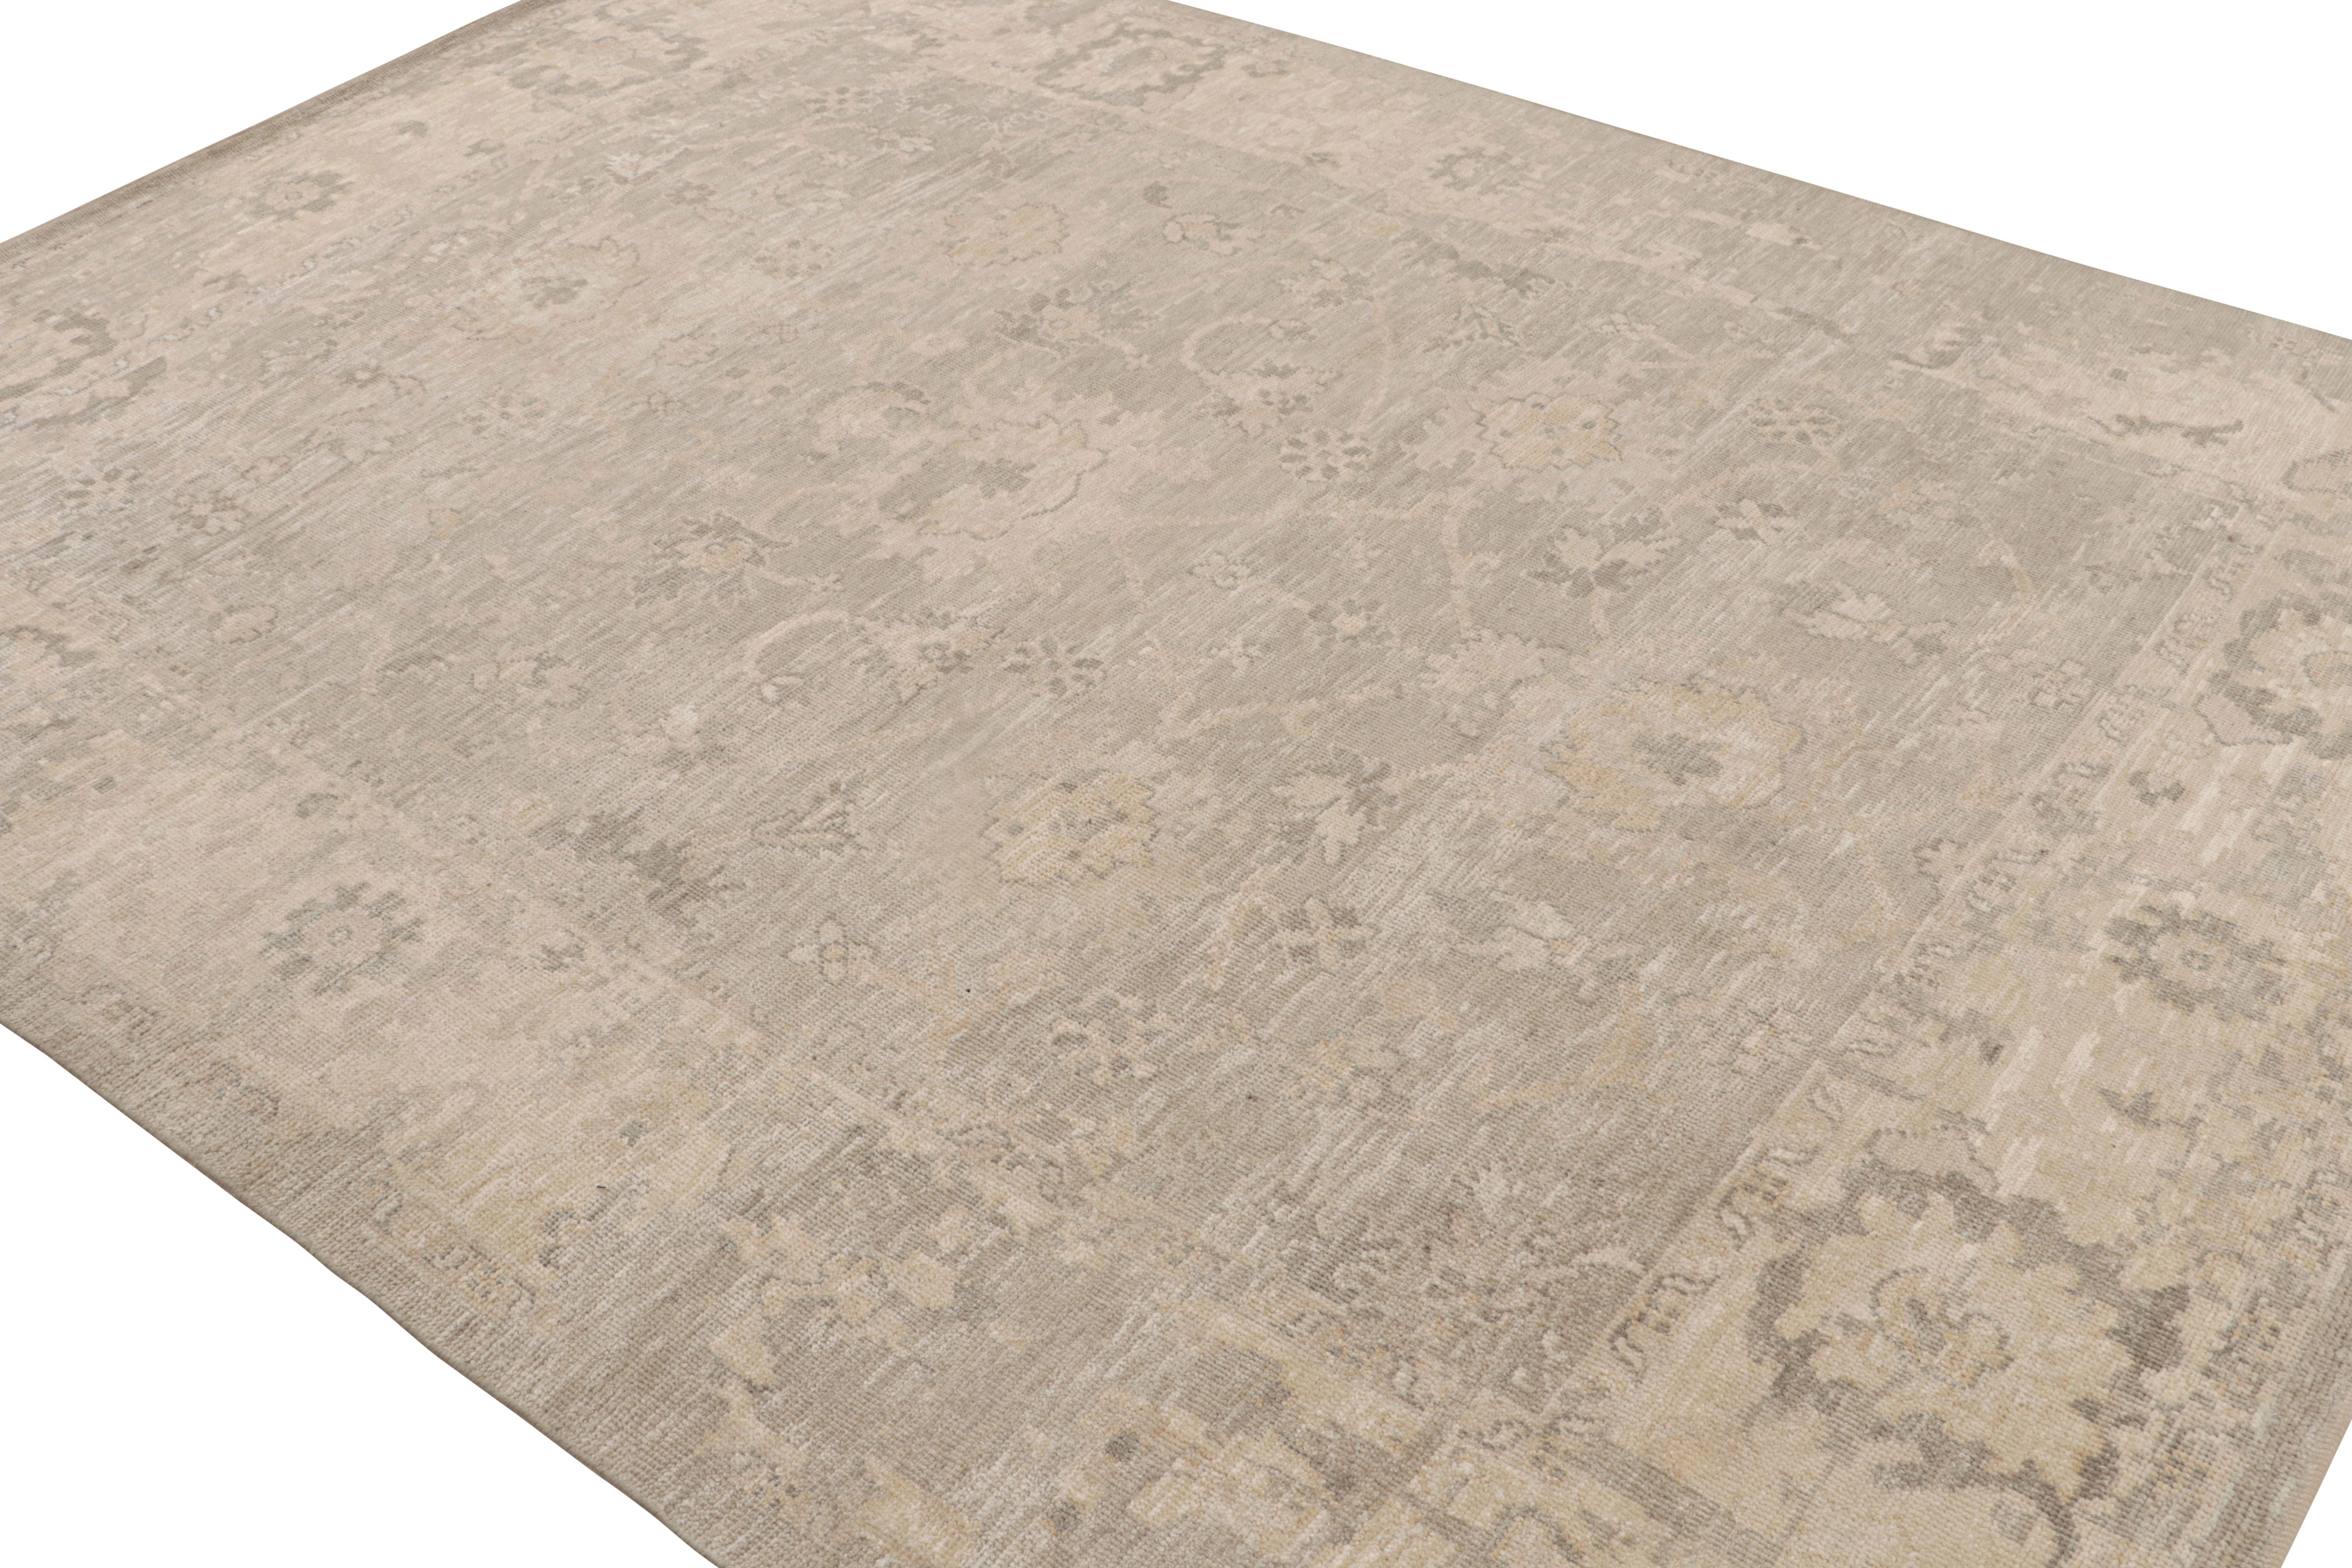 This 8×10 rug from the Modern Classics Collection by Rug & Kilim is from a new line inspired by antique Oushak rugs. Hand-knotted in wool & sari silk, its design enjoys beige, gold & gray floral patterns.  

On the design: 

The rug is made with a